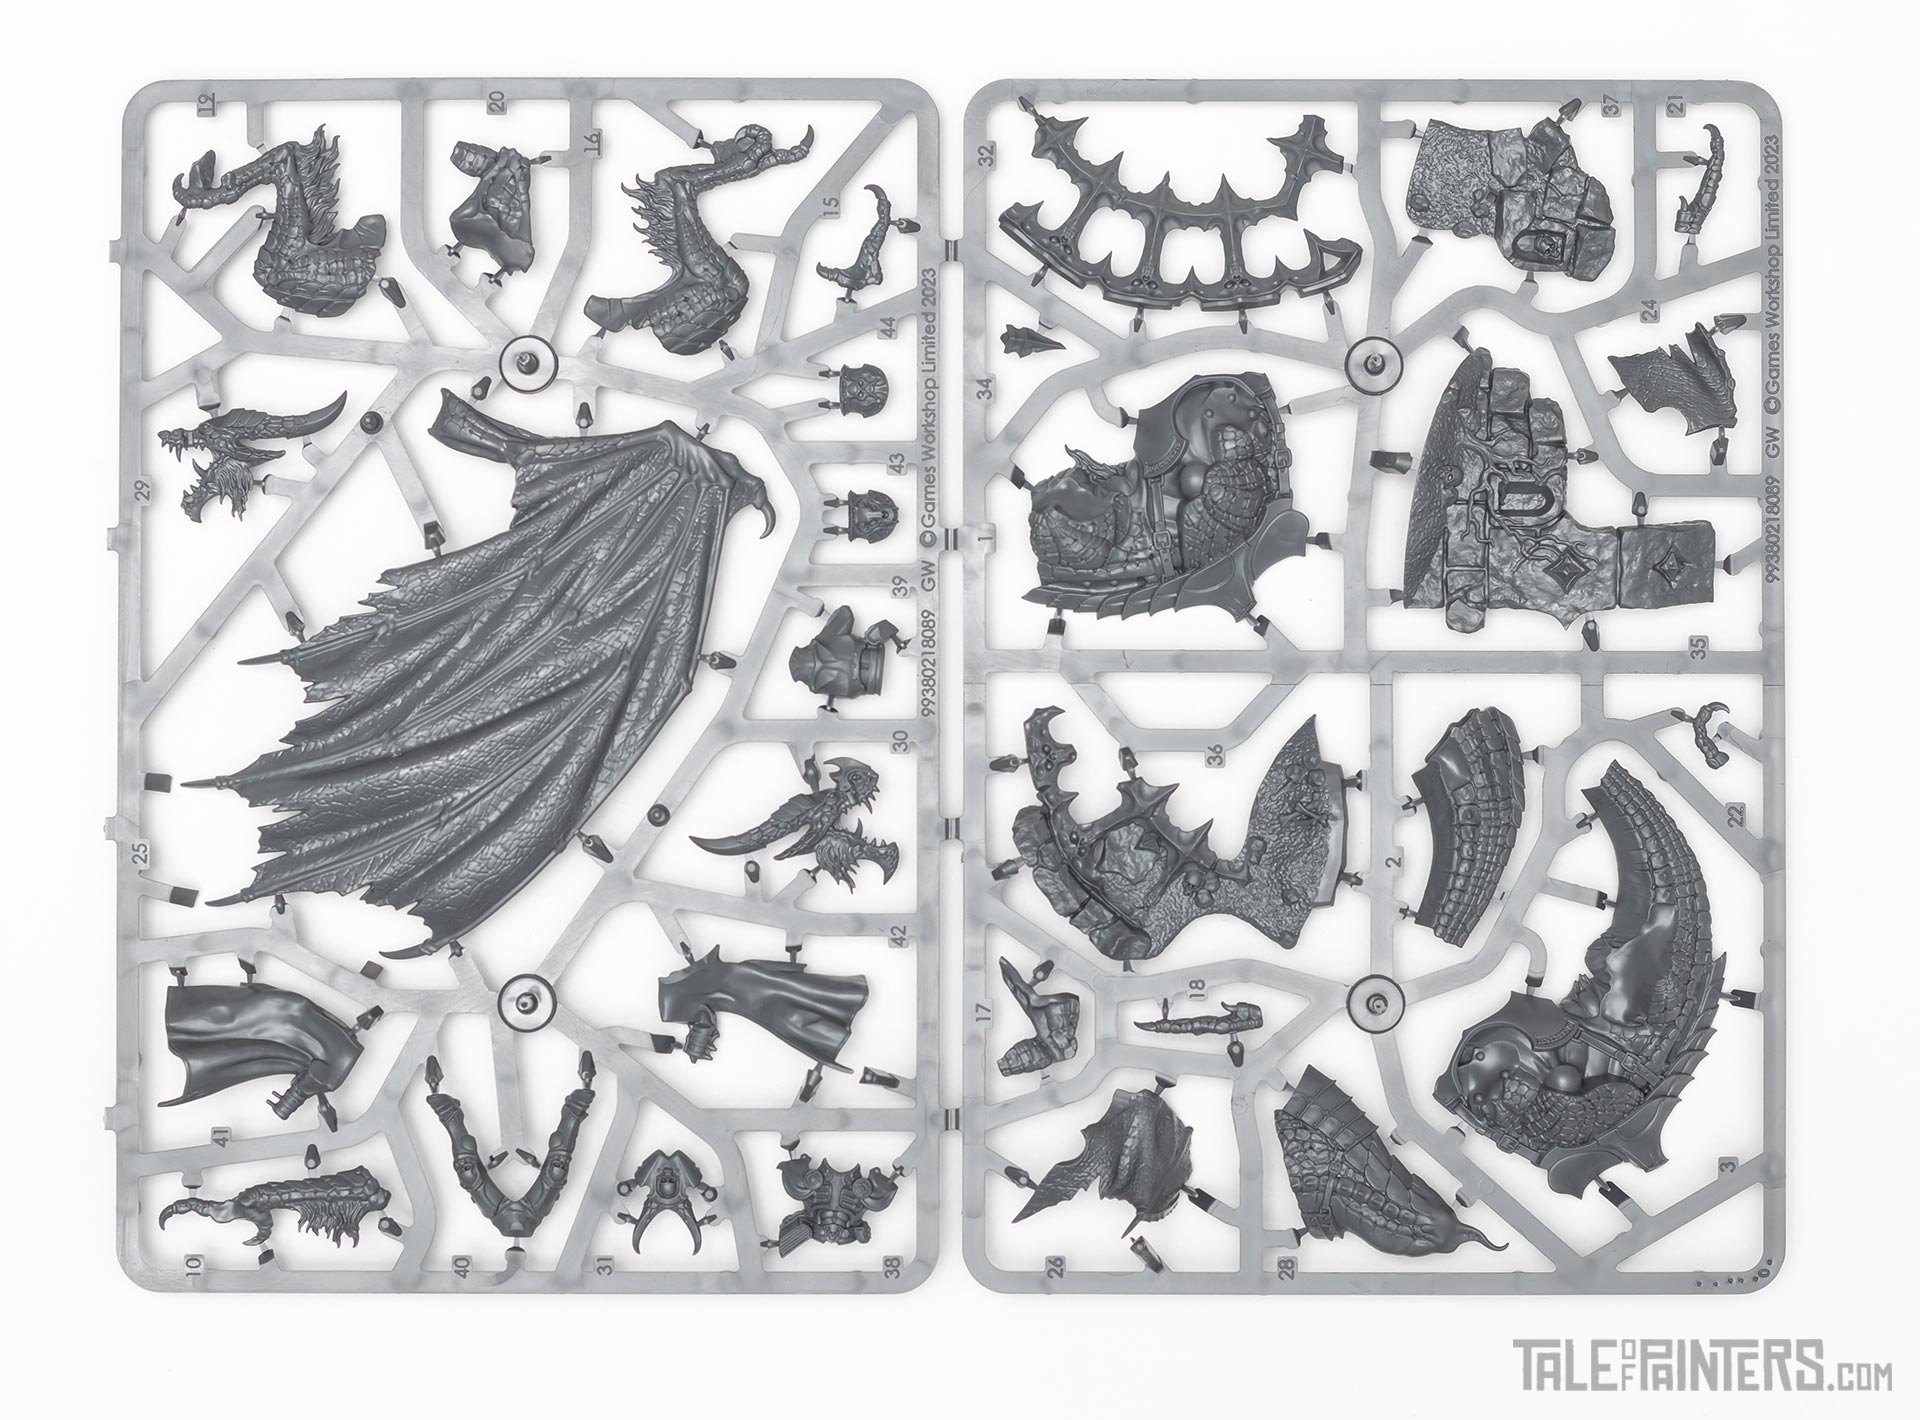 Ionus Cryptborn, Warden of Lost Souls sprues 1 and 2